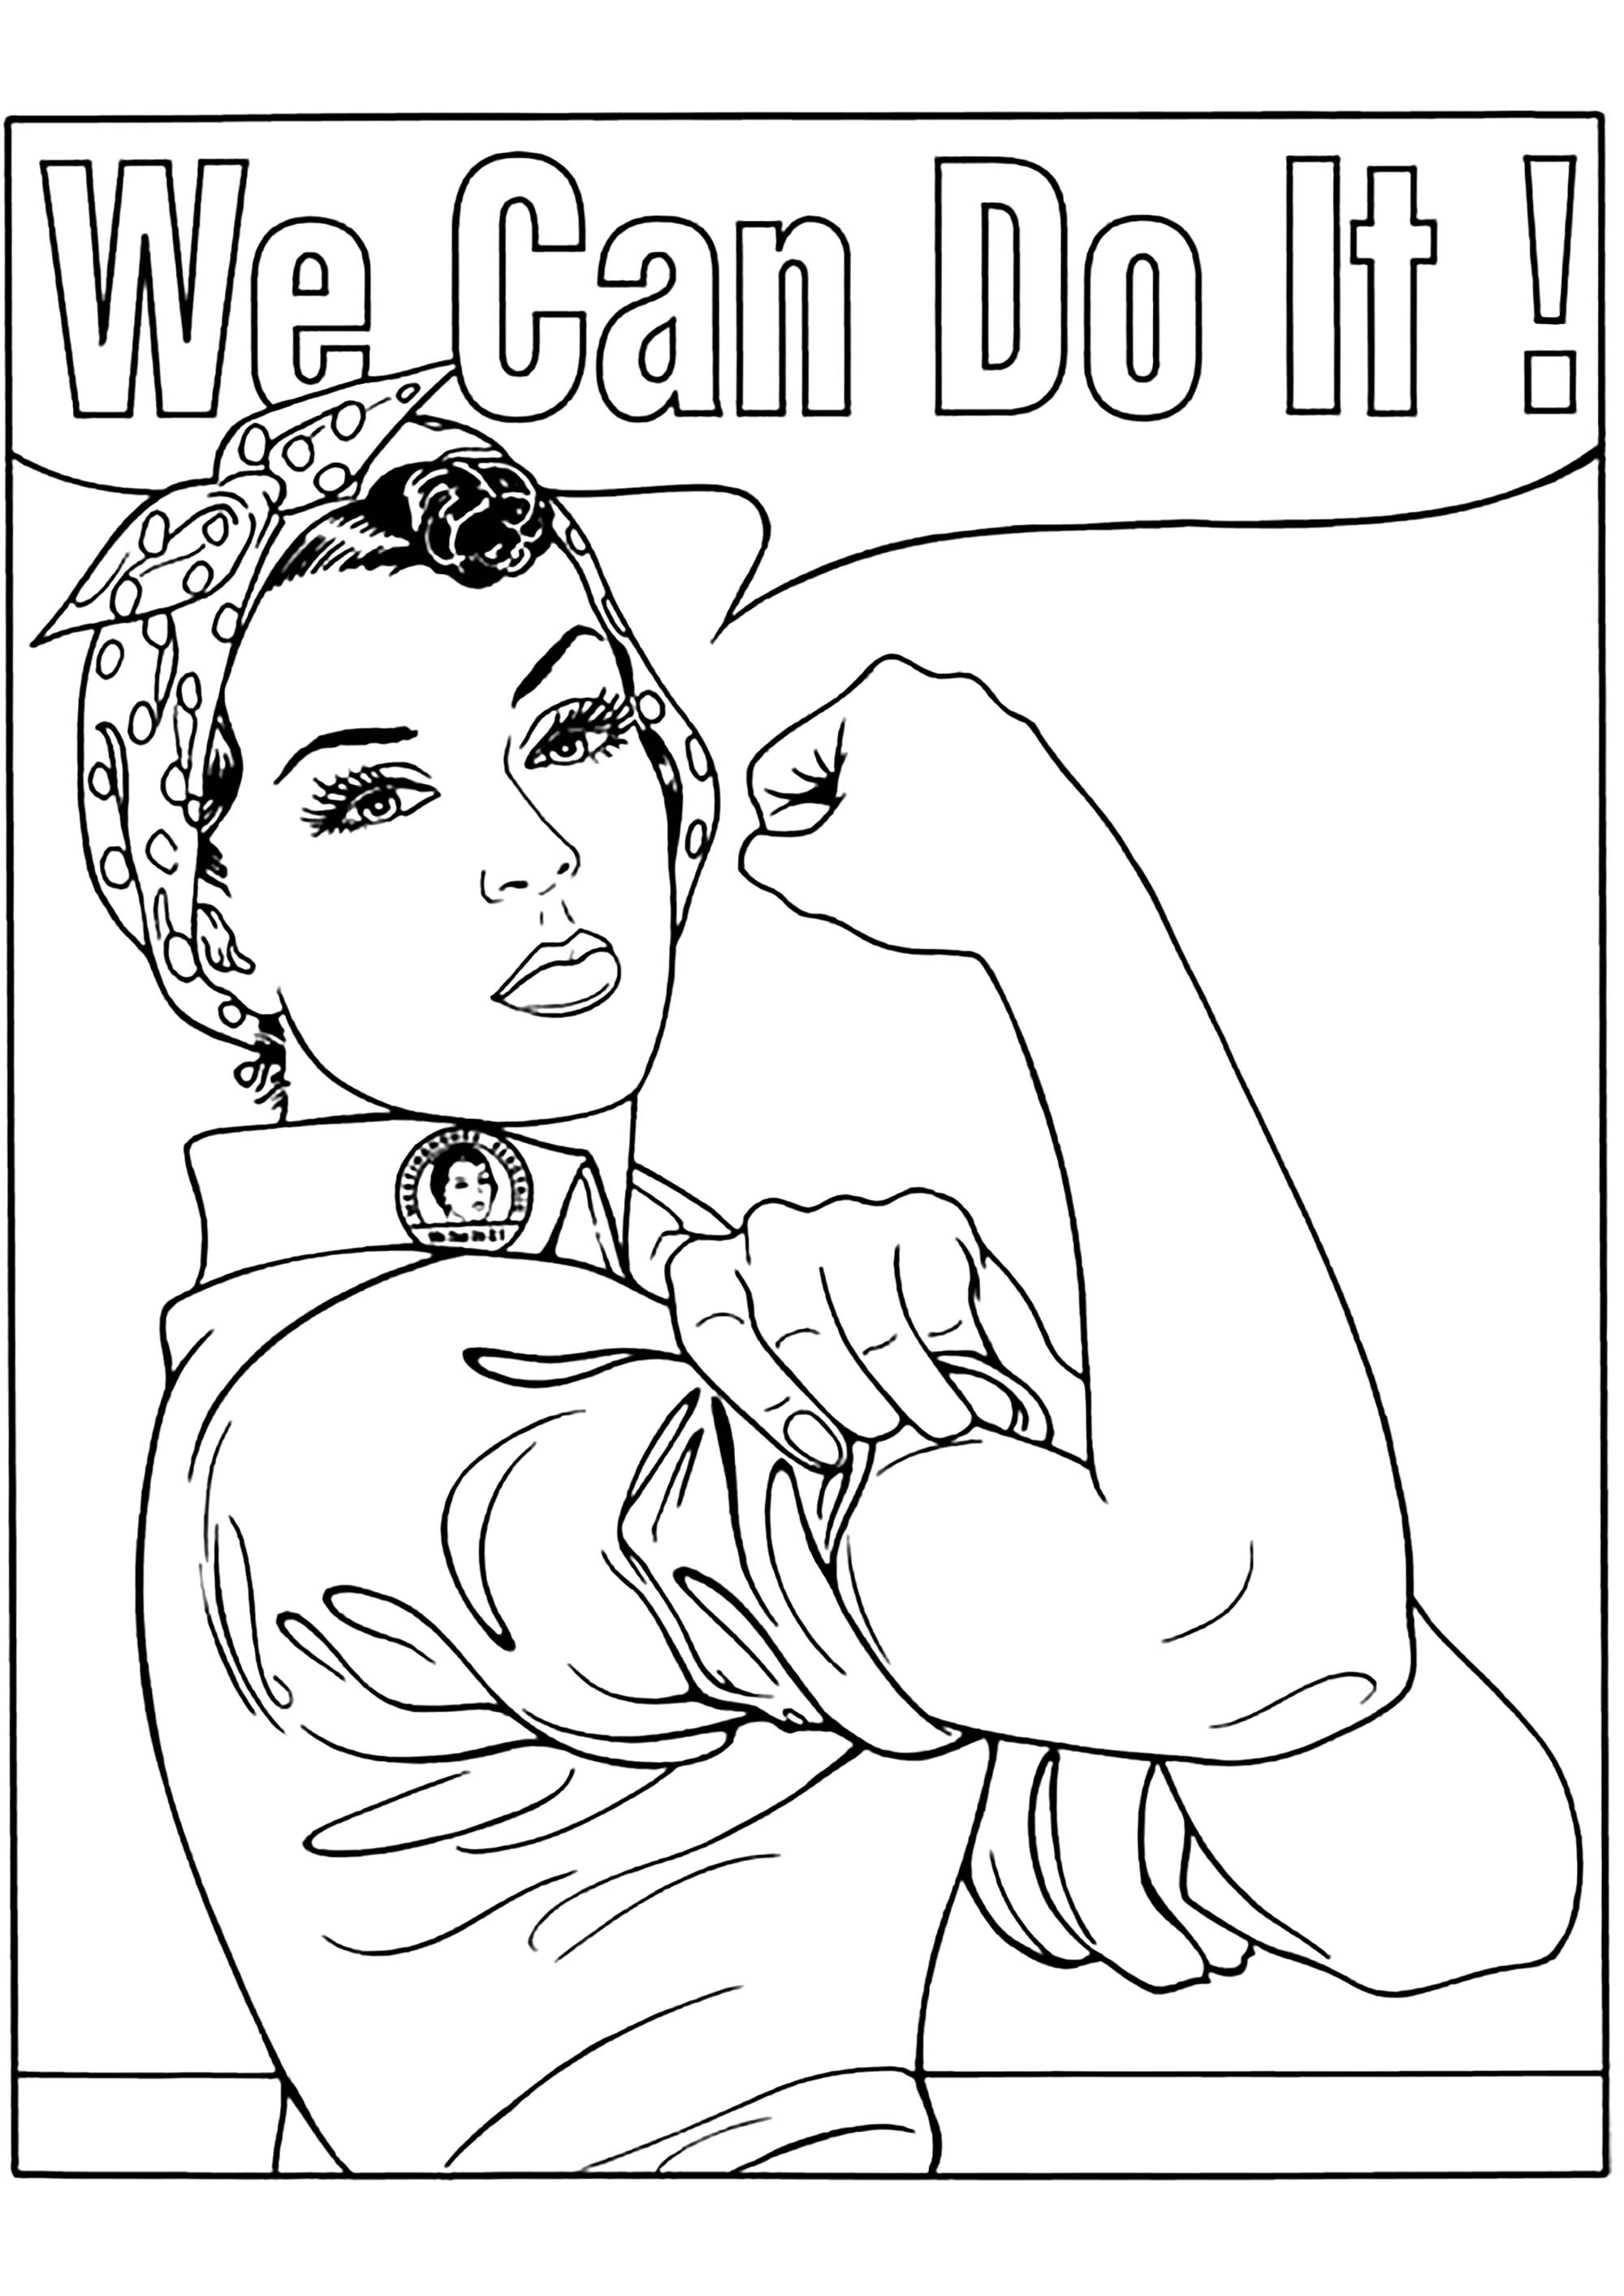 'We Can Do It!' is an American World War II wartime poster produced by J. Howard Miller in 1943. You can now color it